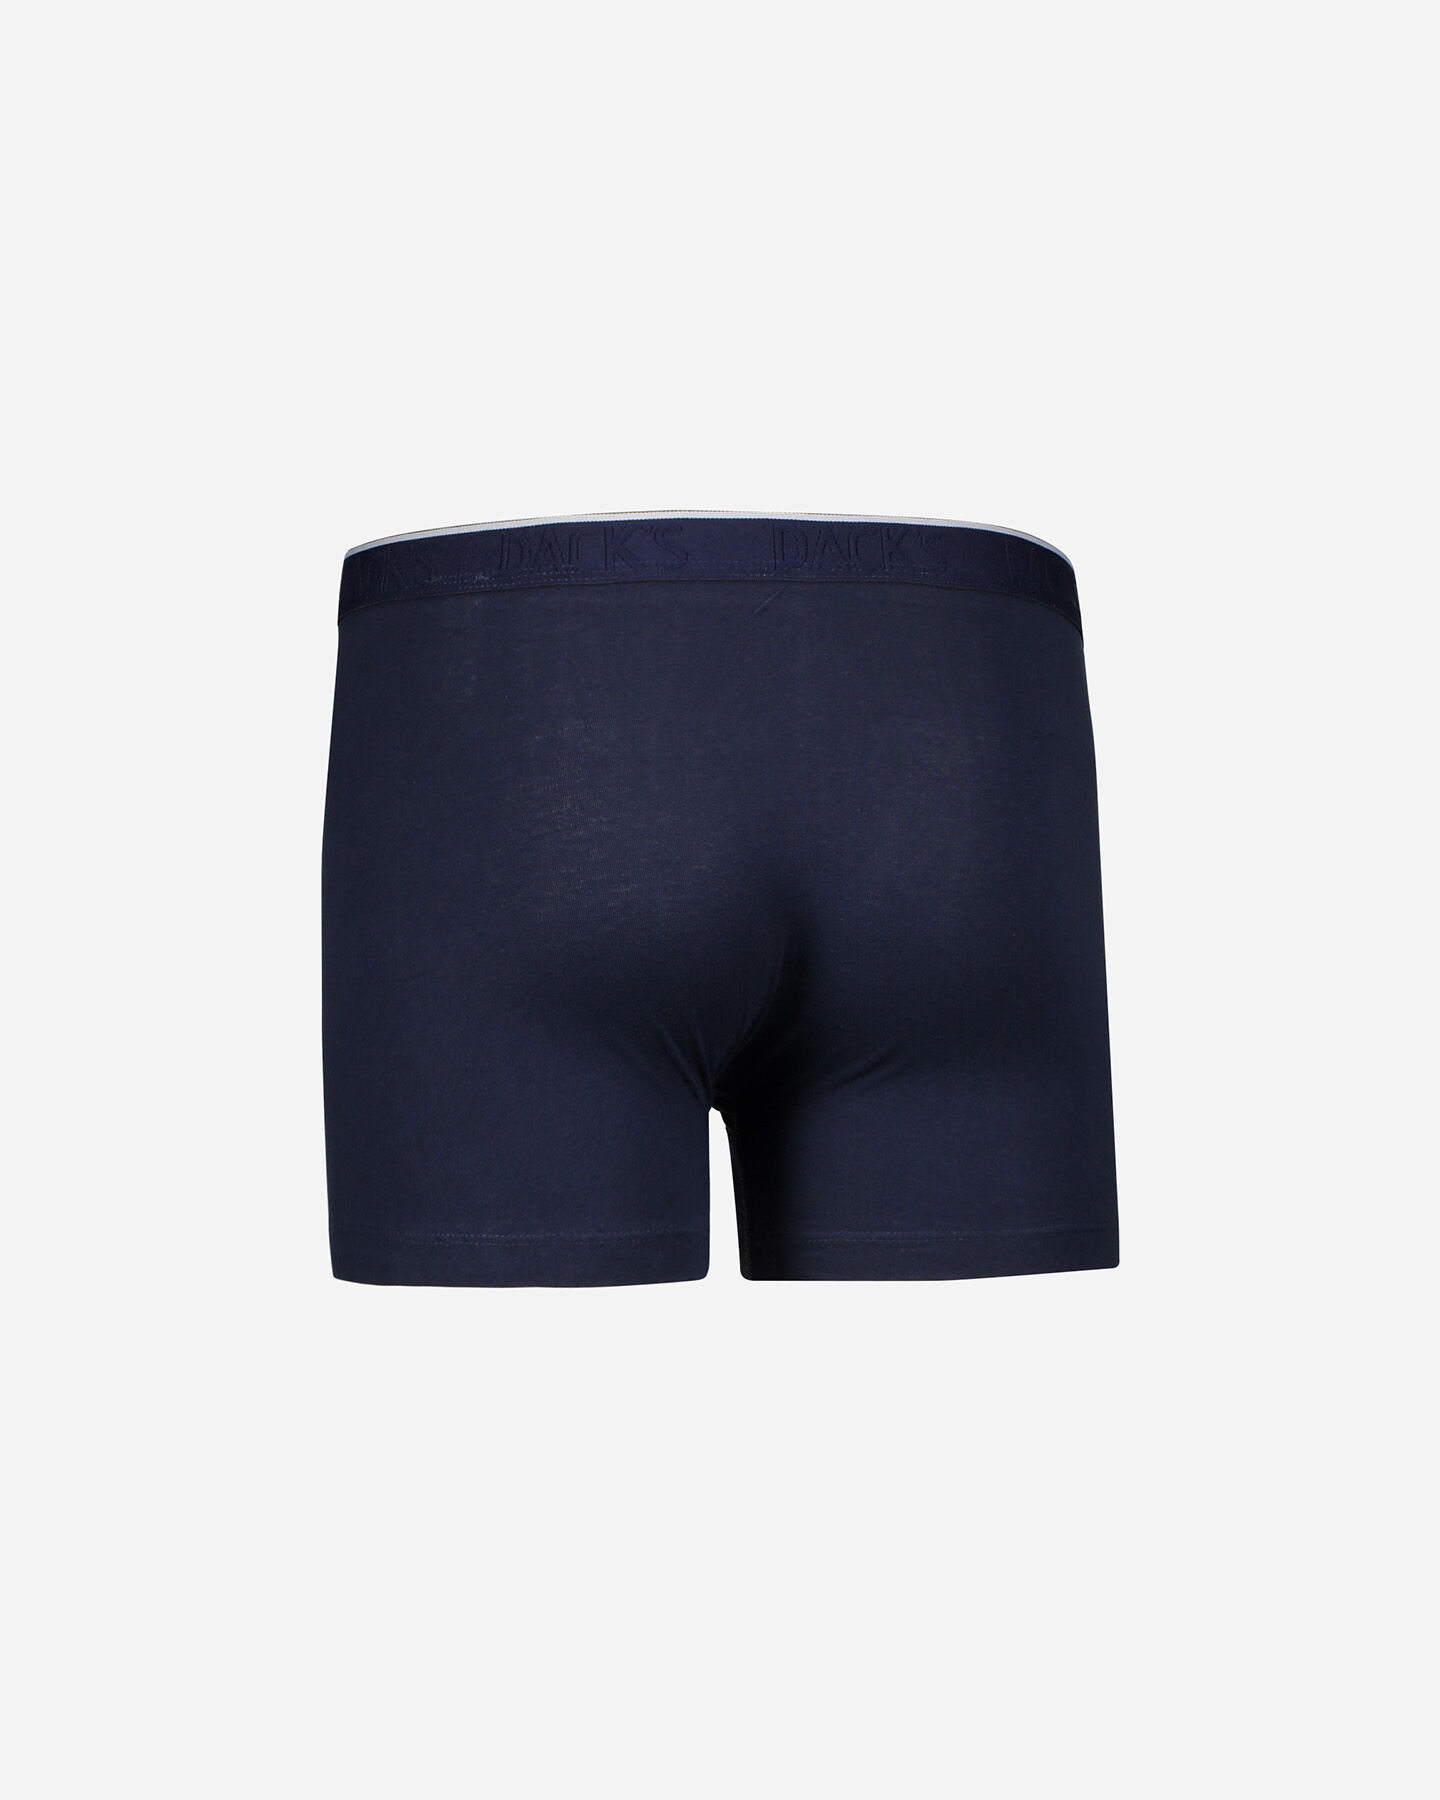  Intimo DACK'S BIPACK BASIC BOXER M S4061964|519/001|S scatto 4